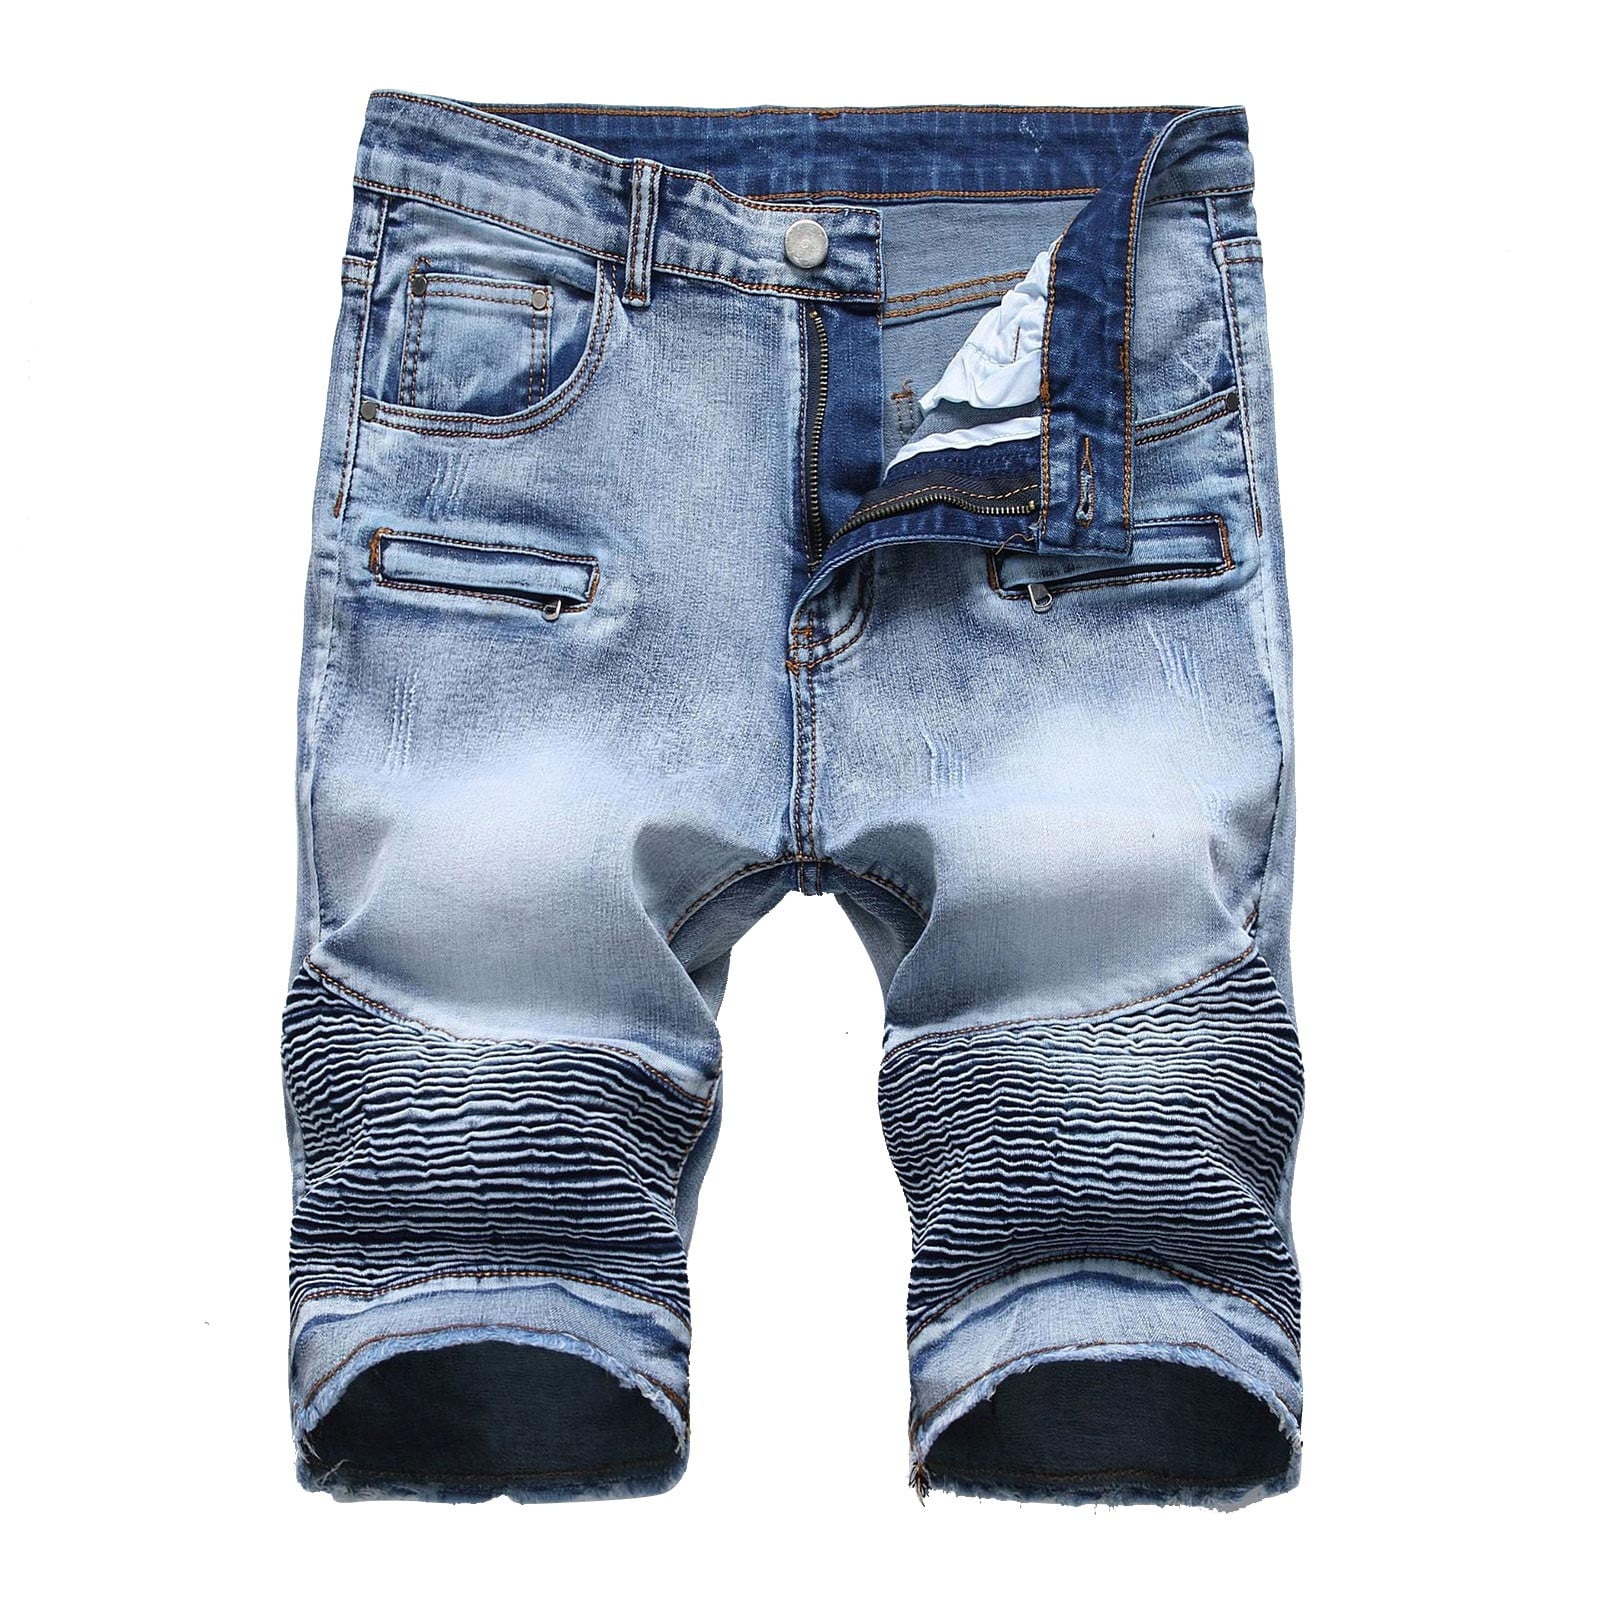 YYDGH Men's Ripped Jean Short Distressed Straight Fit Denim Shorts